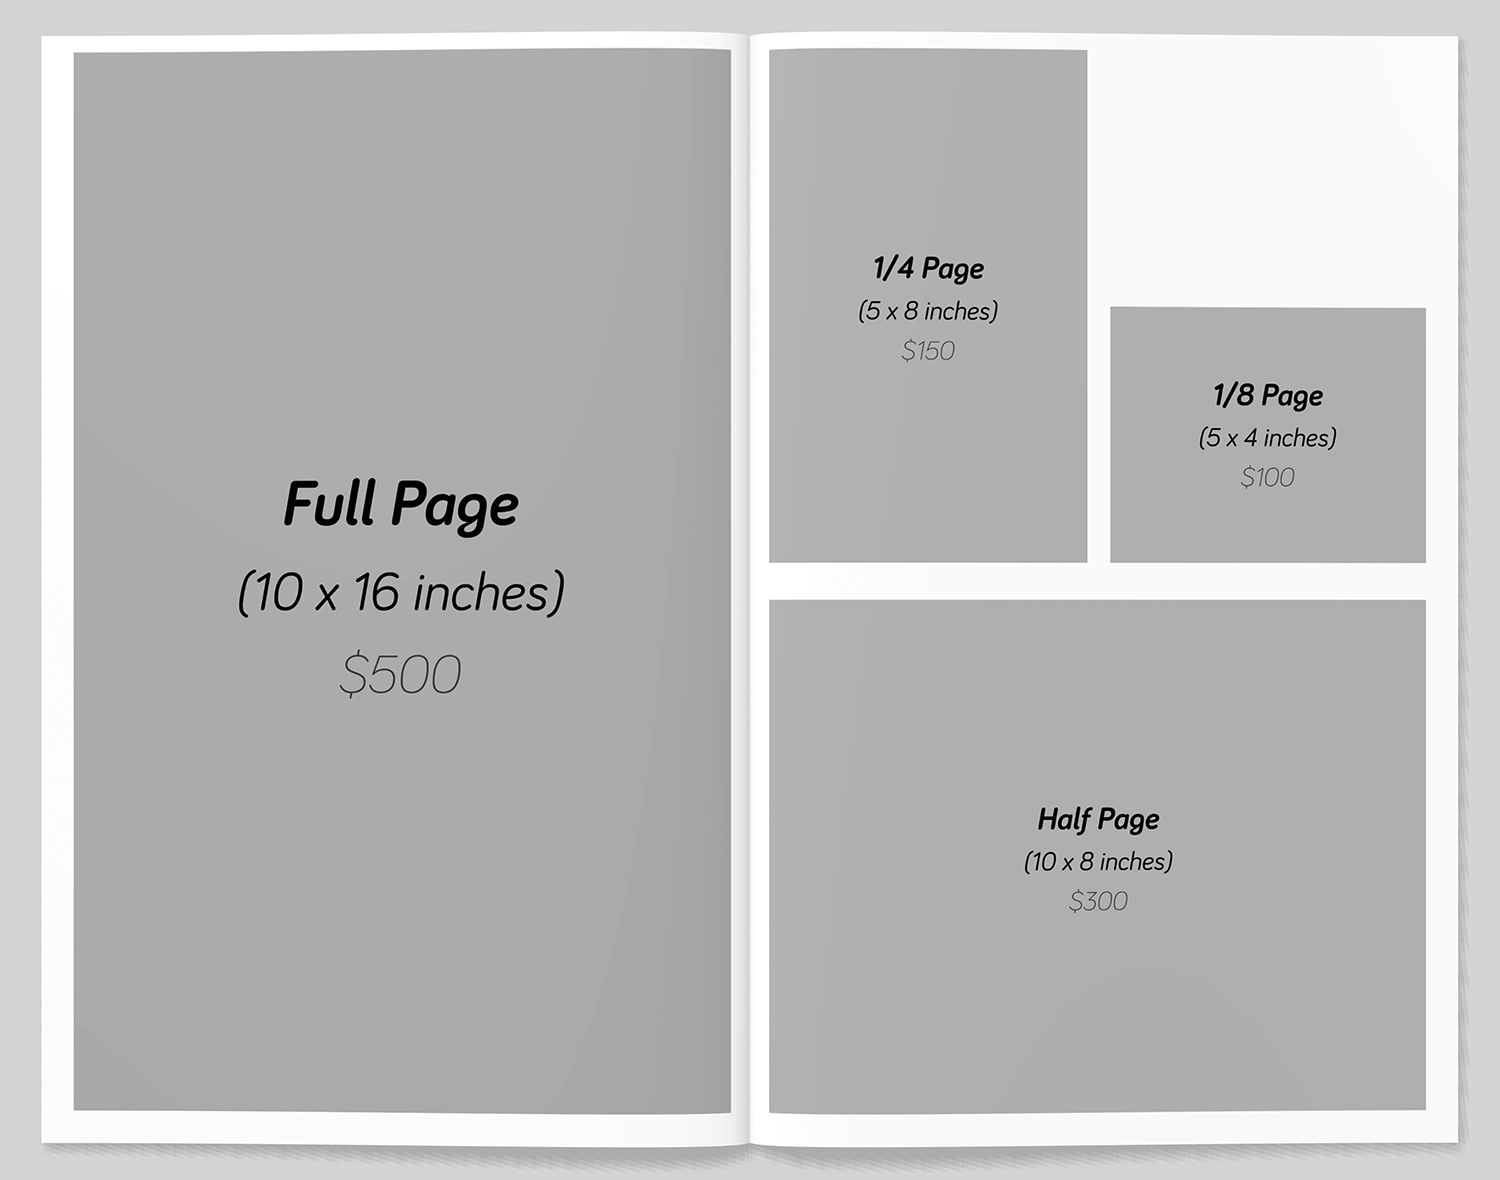 Sizes and rates of ads in print issues